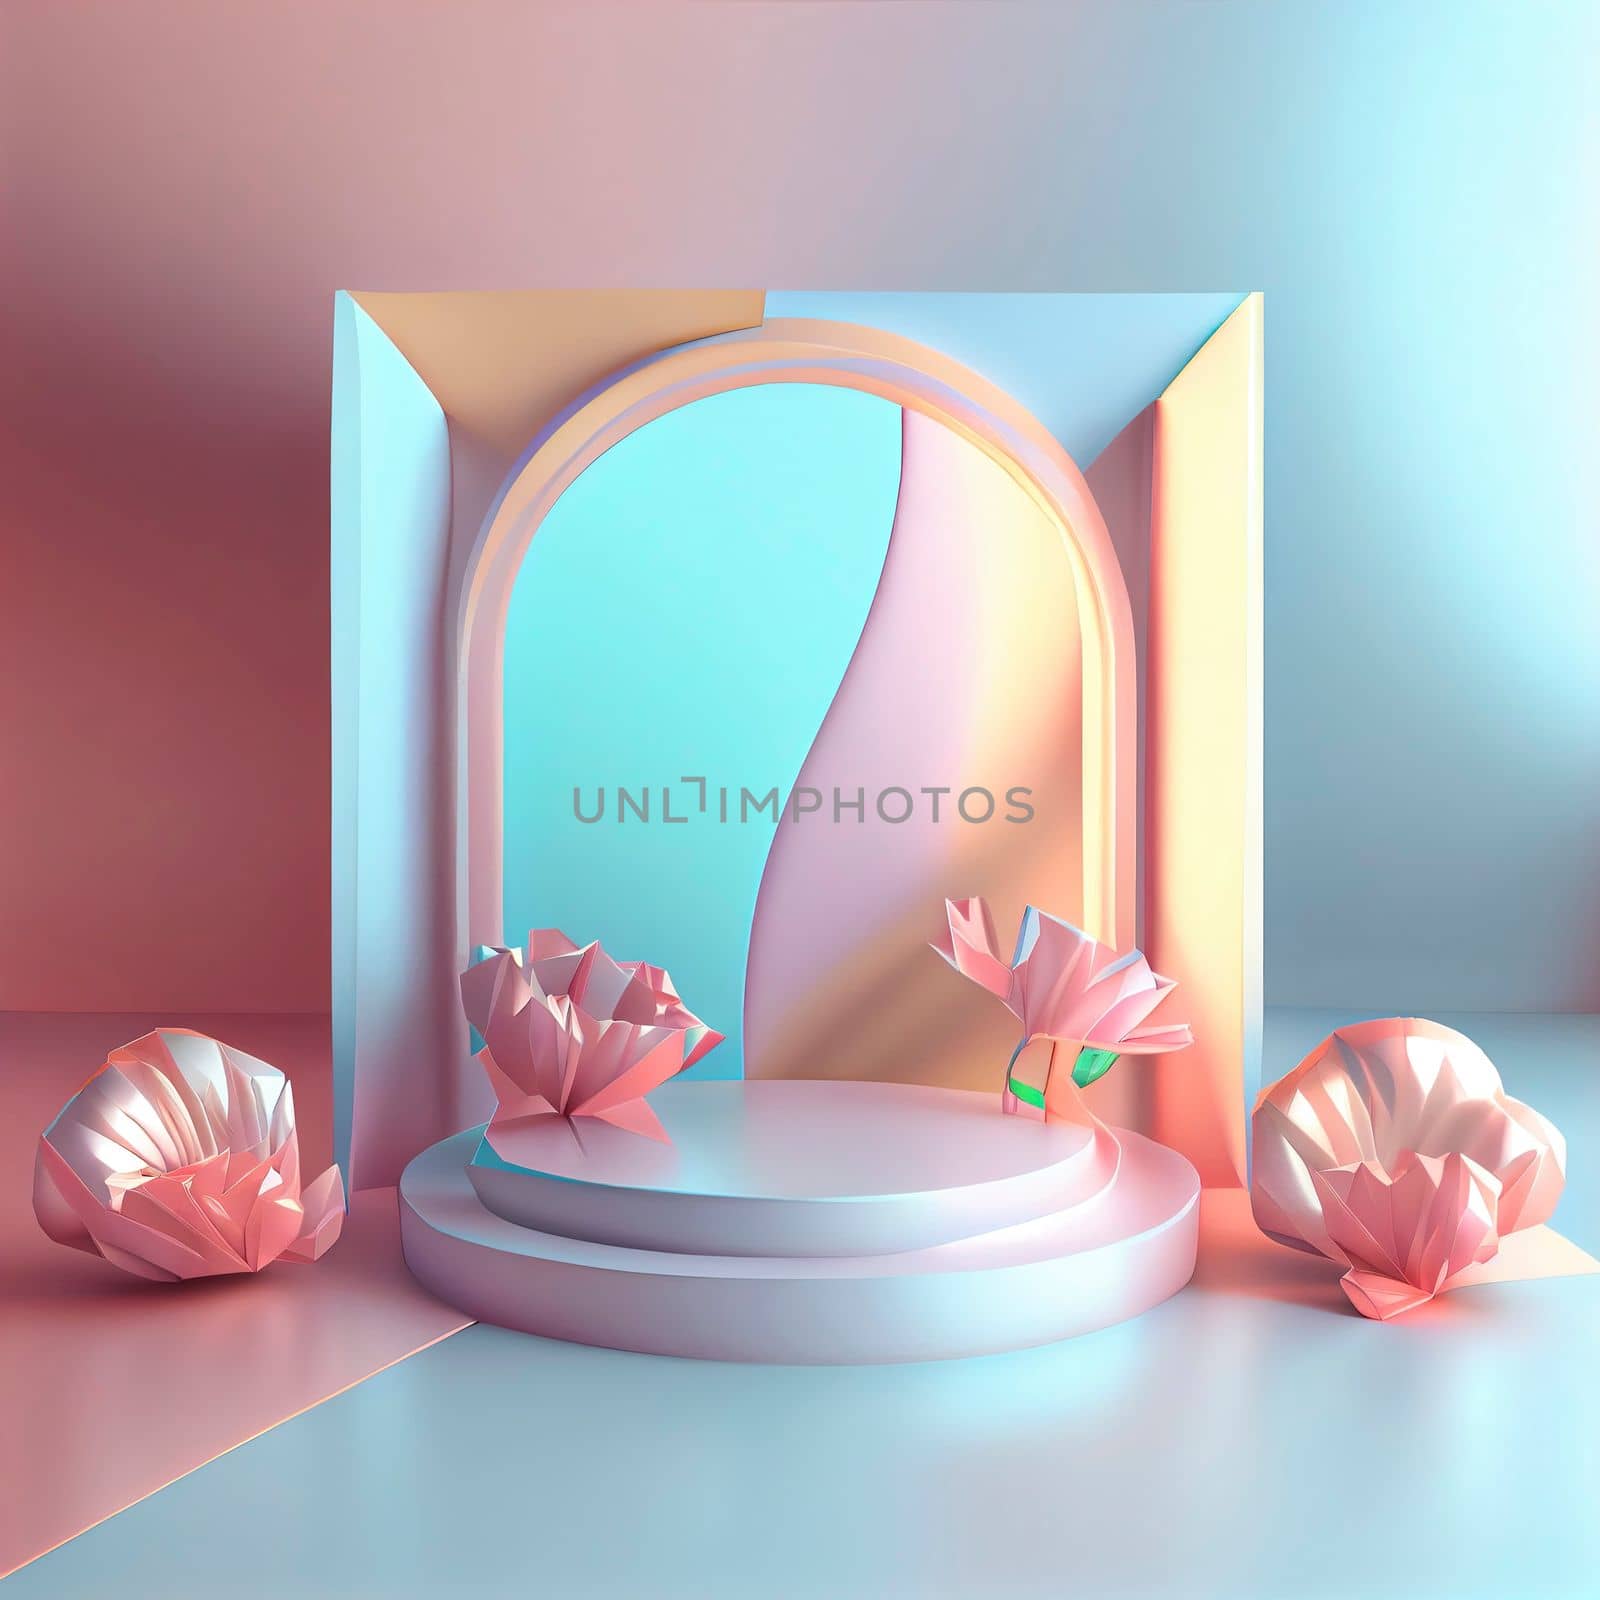 Luxury podium 3d illustration with elegant pink color and abstract flower wreath ornament for product display by templator